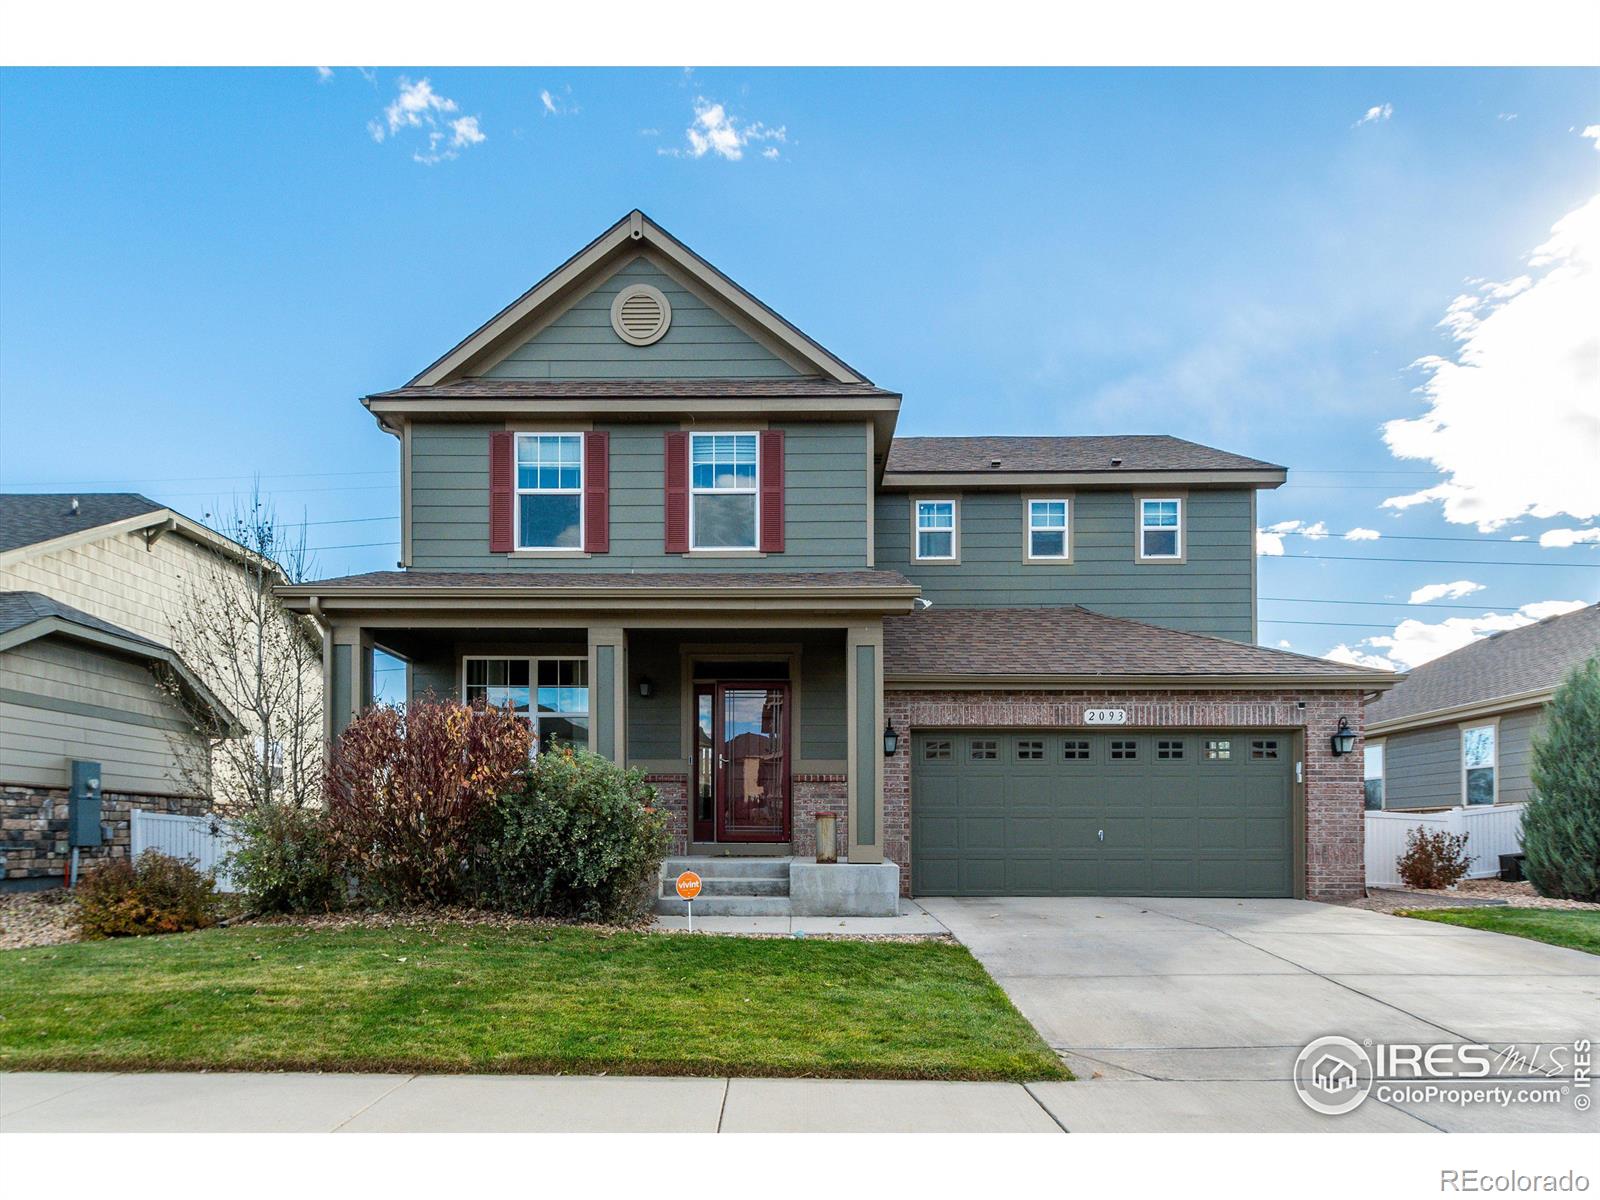 Report Image for 2093  Winding Drive,Longmont, Colorado